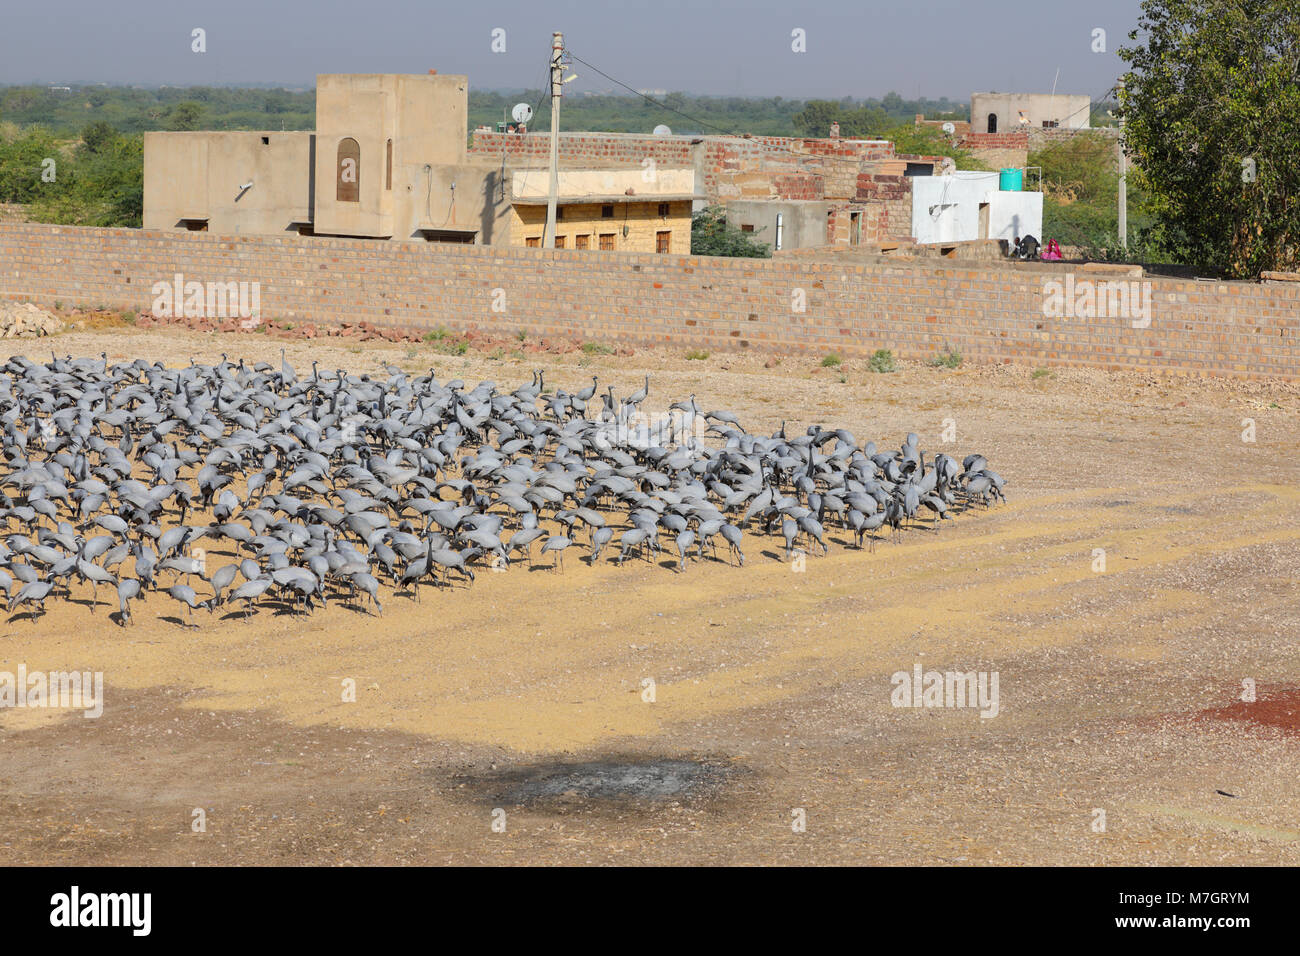 A large flock of Demoiselle Cranes (Grus virgo) feeding at the traditional site of Khichan, Rajasthan, India Stock Photo